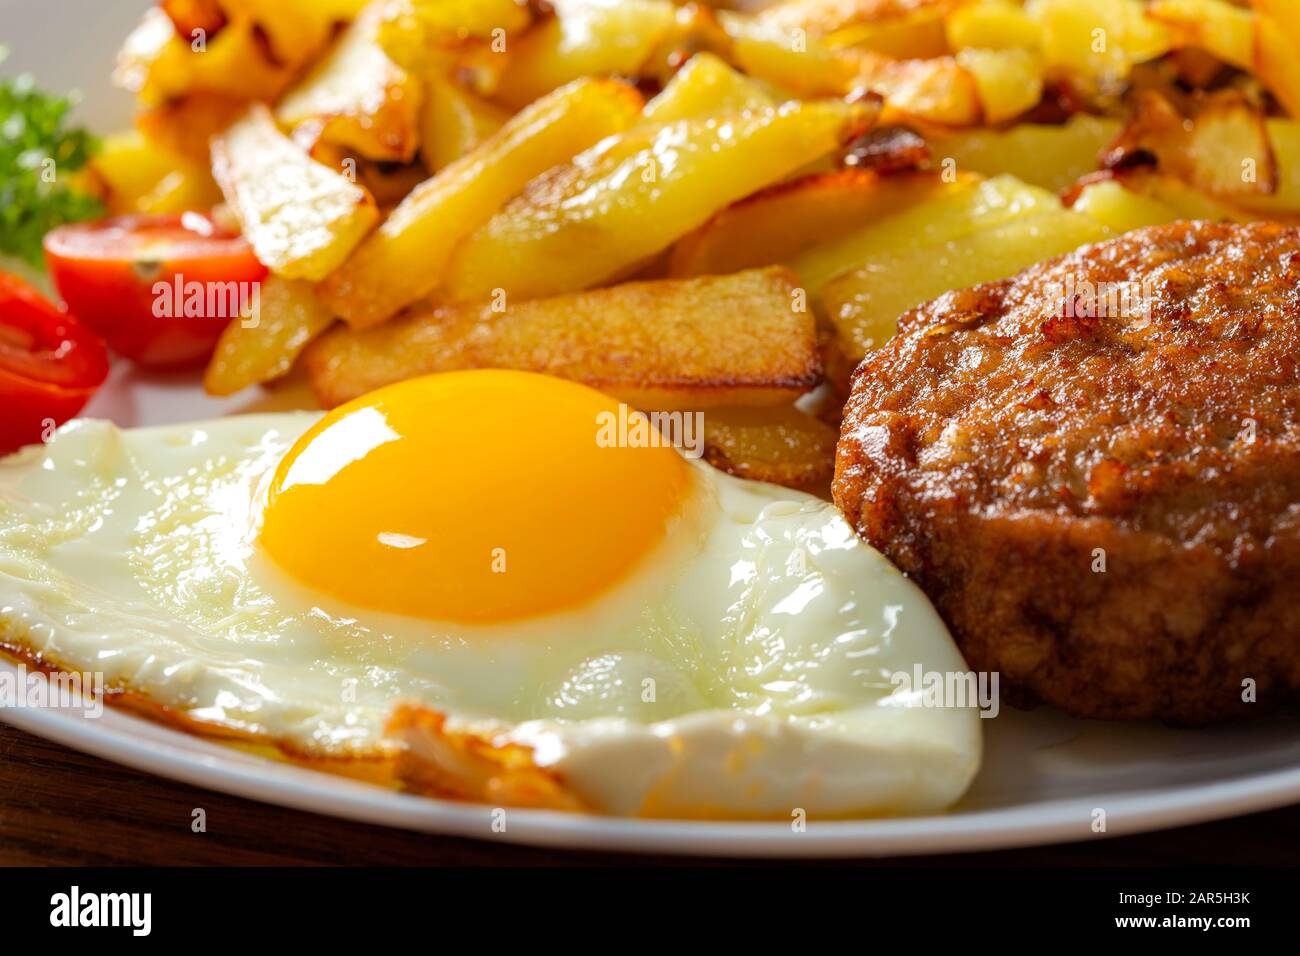 Fries with fried egg and one big meatball on plate - close up view Stock Photo